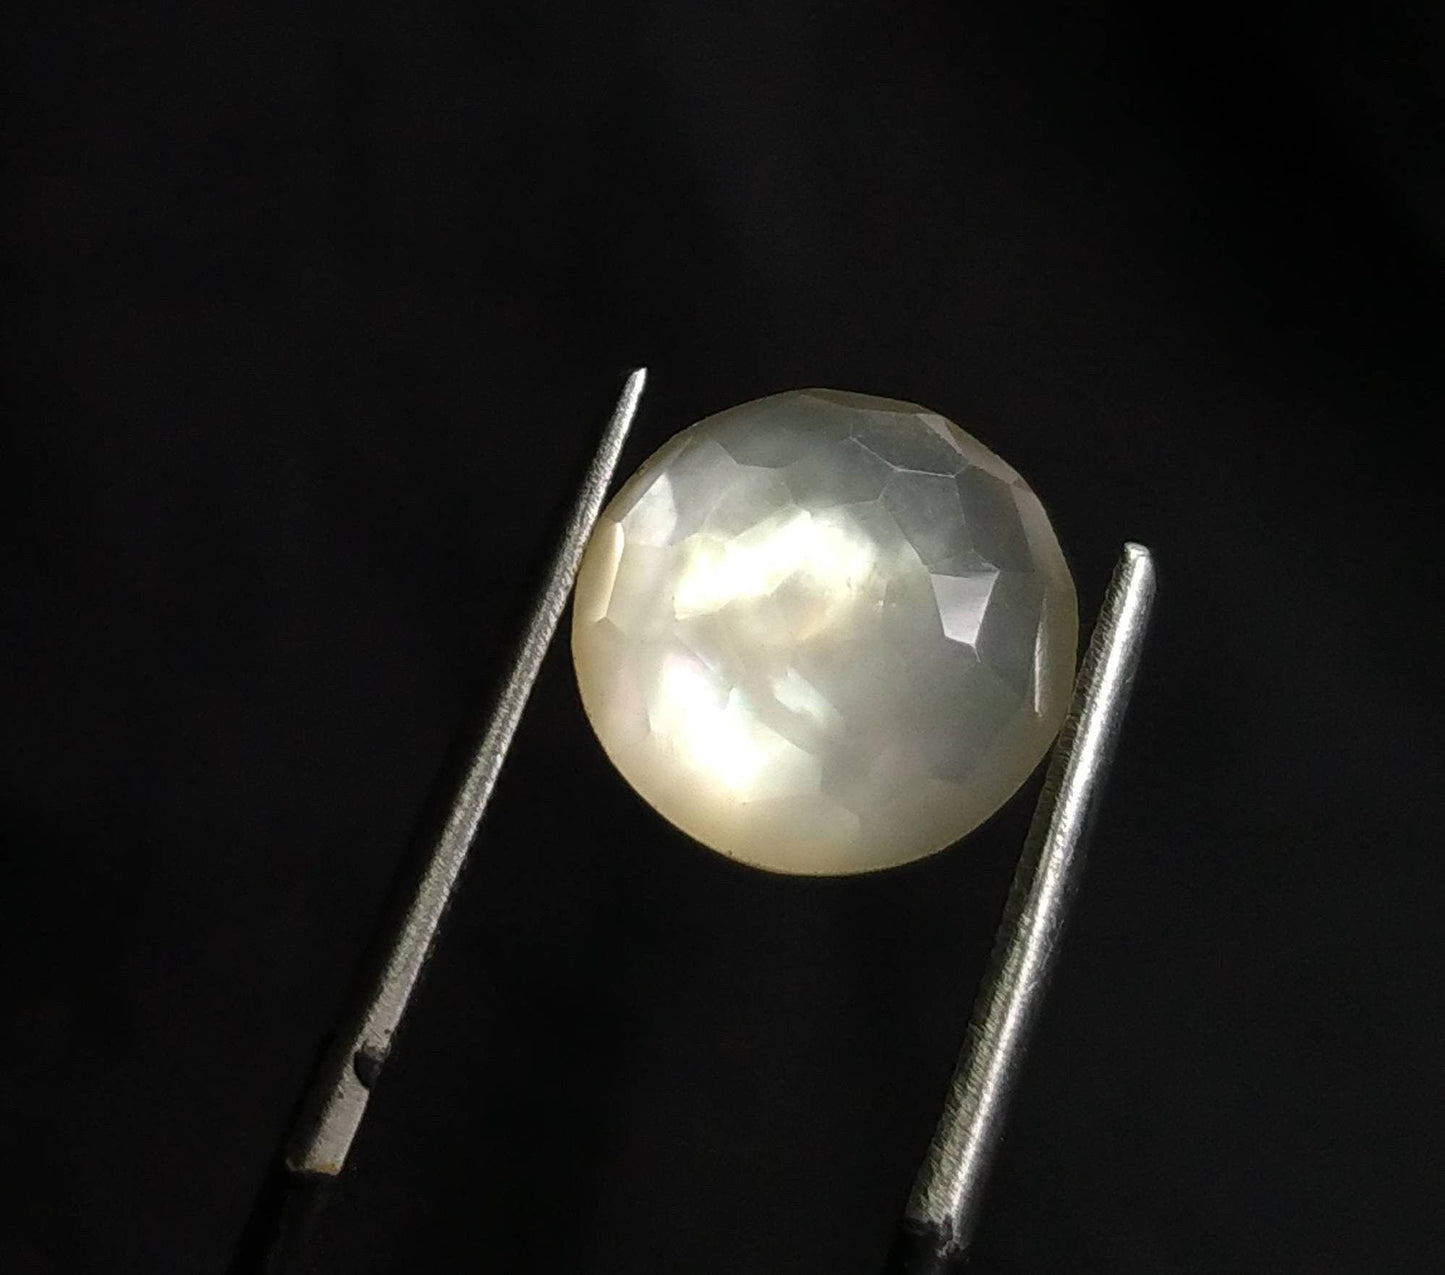 ARSAA GEMS AND MINERALSNatural top quality beautiful 13 carats small set of rose cut Faceted quartz with mother of pearl doublets Cabochons - Premium  from ARSAA GEMS AND MINERALS - Just $20.00! Shop now at ARSAA GEMS AND MINERALS